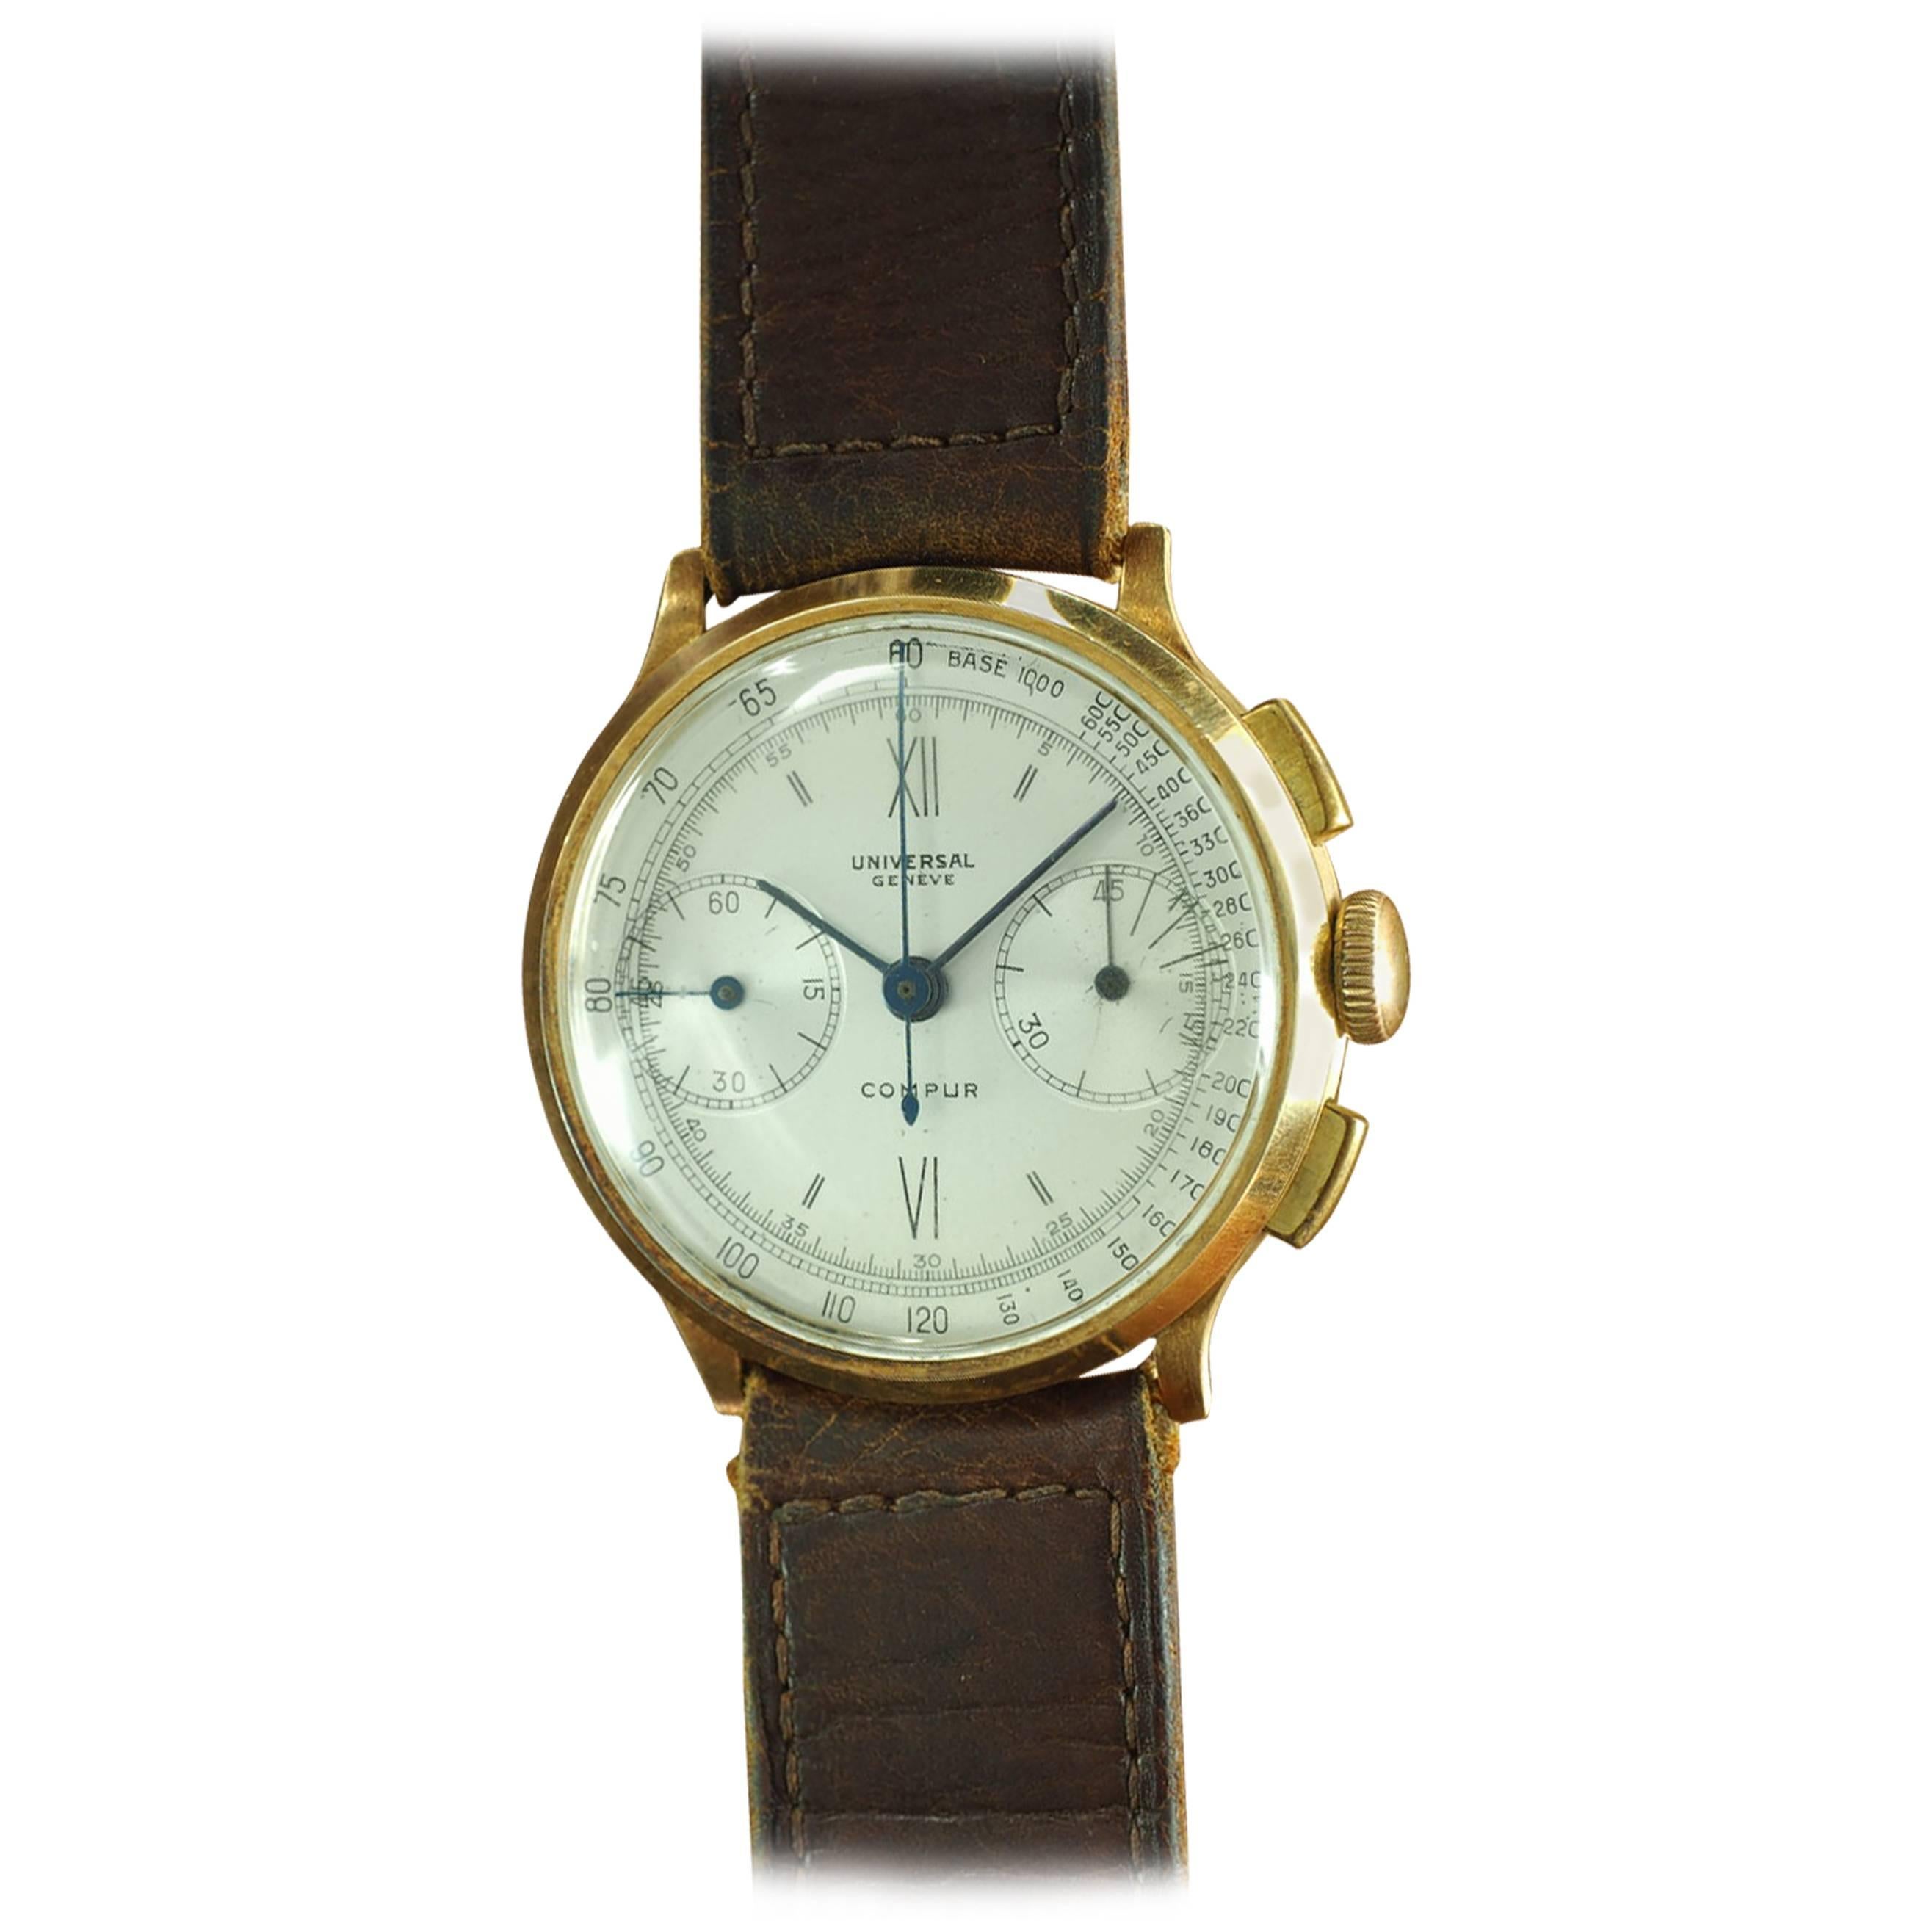 Universal Geneve Compur Isotta Fraschini Yellow Gold Chronograph Wristwatch  For Sale